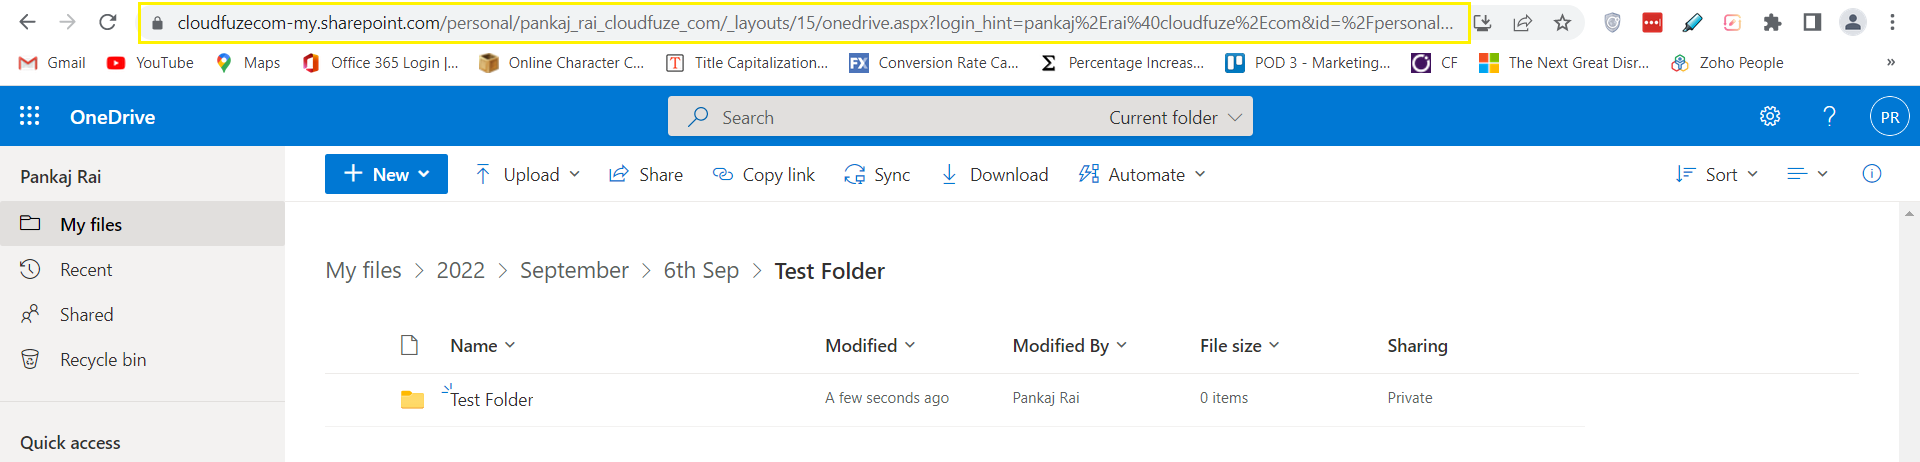 SharePoint link for a new folder in OneDrive